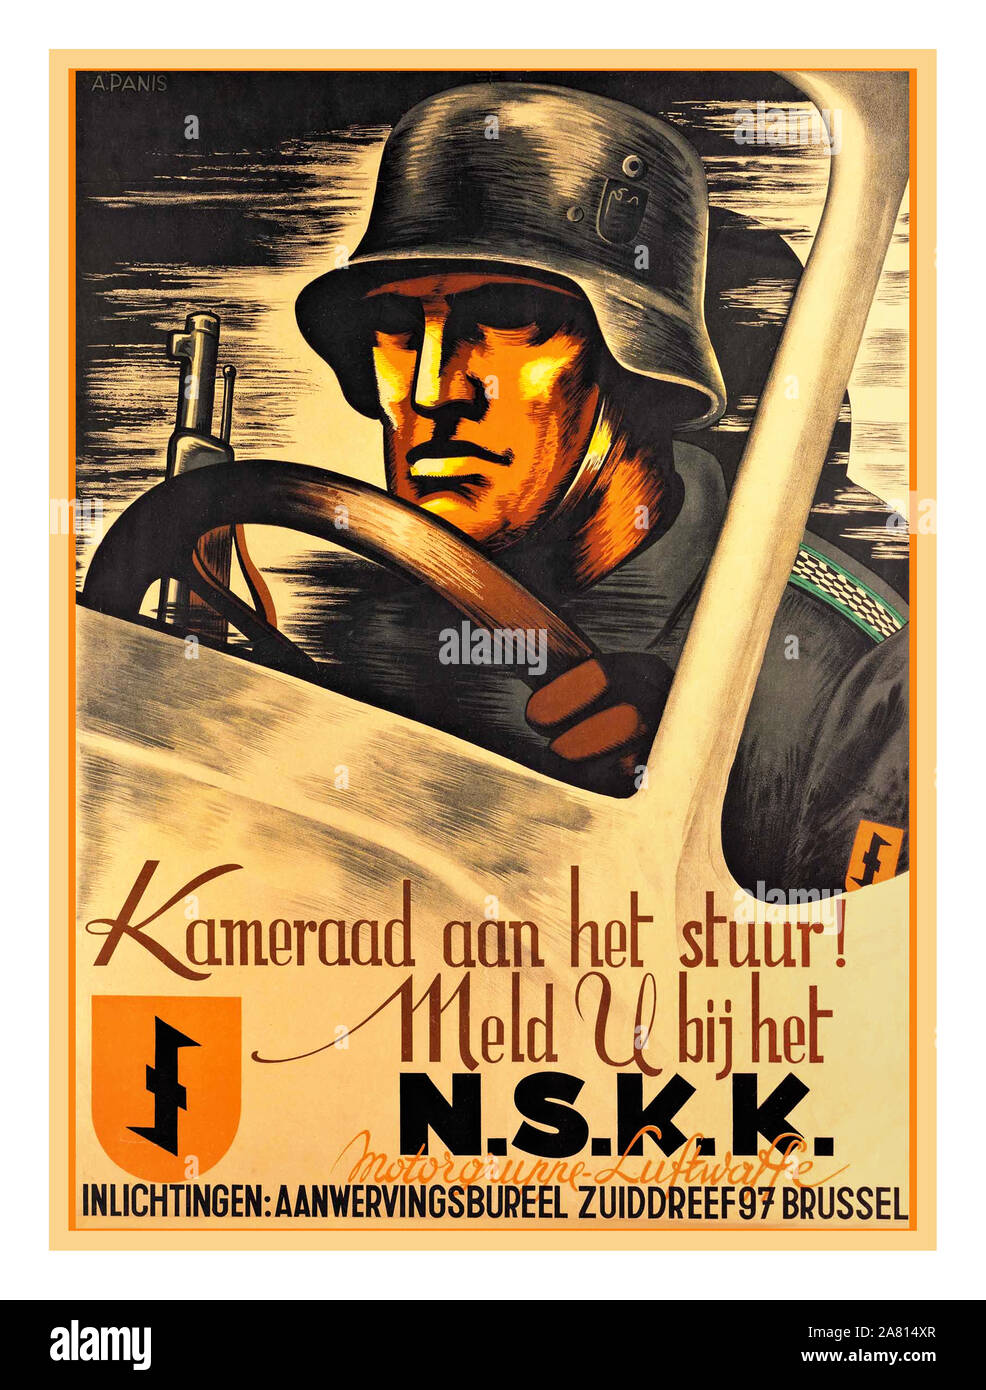 Vintage WW2 Nazi Party Flemish recruiting poster for the NSKK (Nationalsozialistisches Kraftfahrkorps;  National Socialist Motor Corps, a paramilitary organization of the Nazi Party (NSDAP) that officially existed from May 1931 to 1945.'kameraad aan het stuur meld U bij het' 'comrade at the wheel sign in at the NSKK' RECRUITMENT RECRUITING PROPAGANDA POSTER World War II Stock Photo